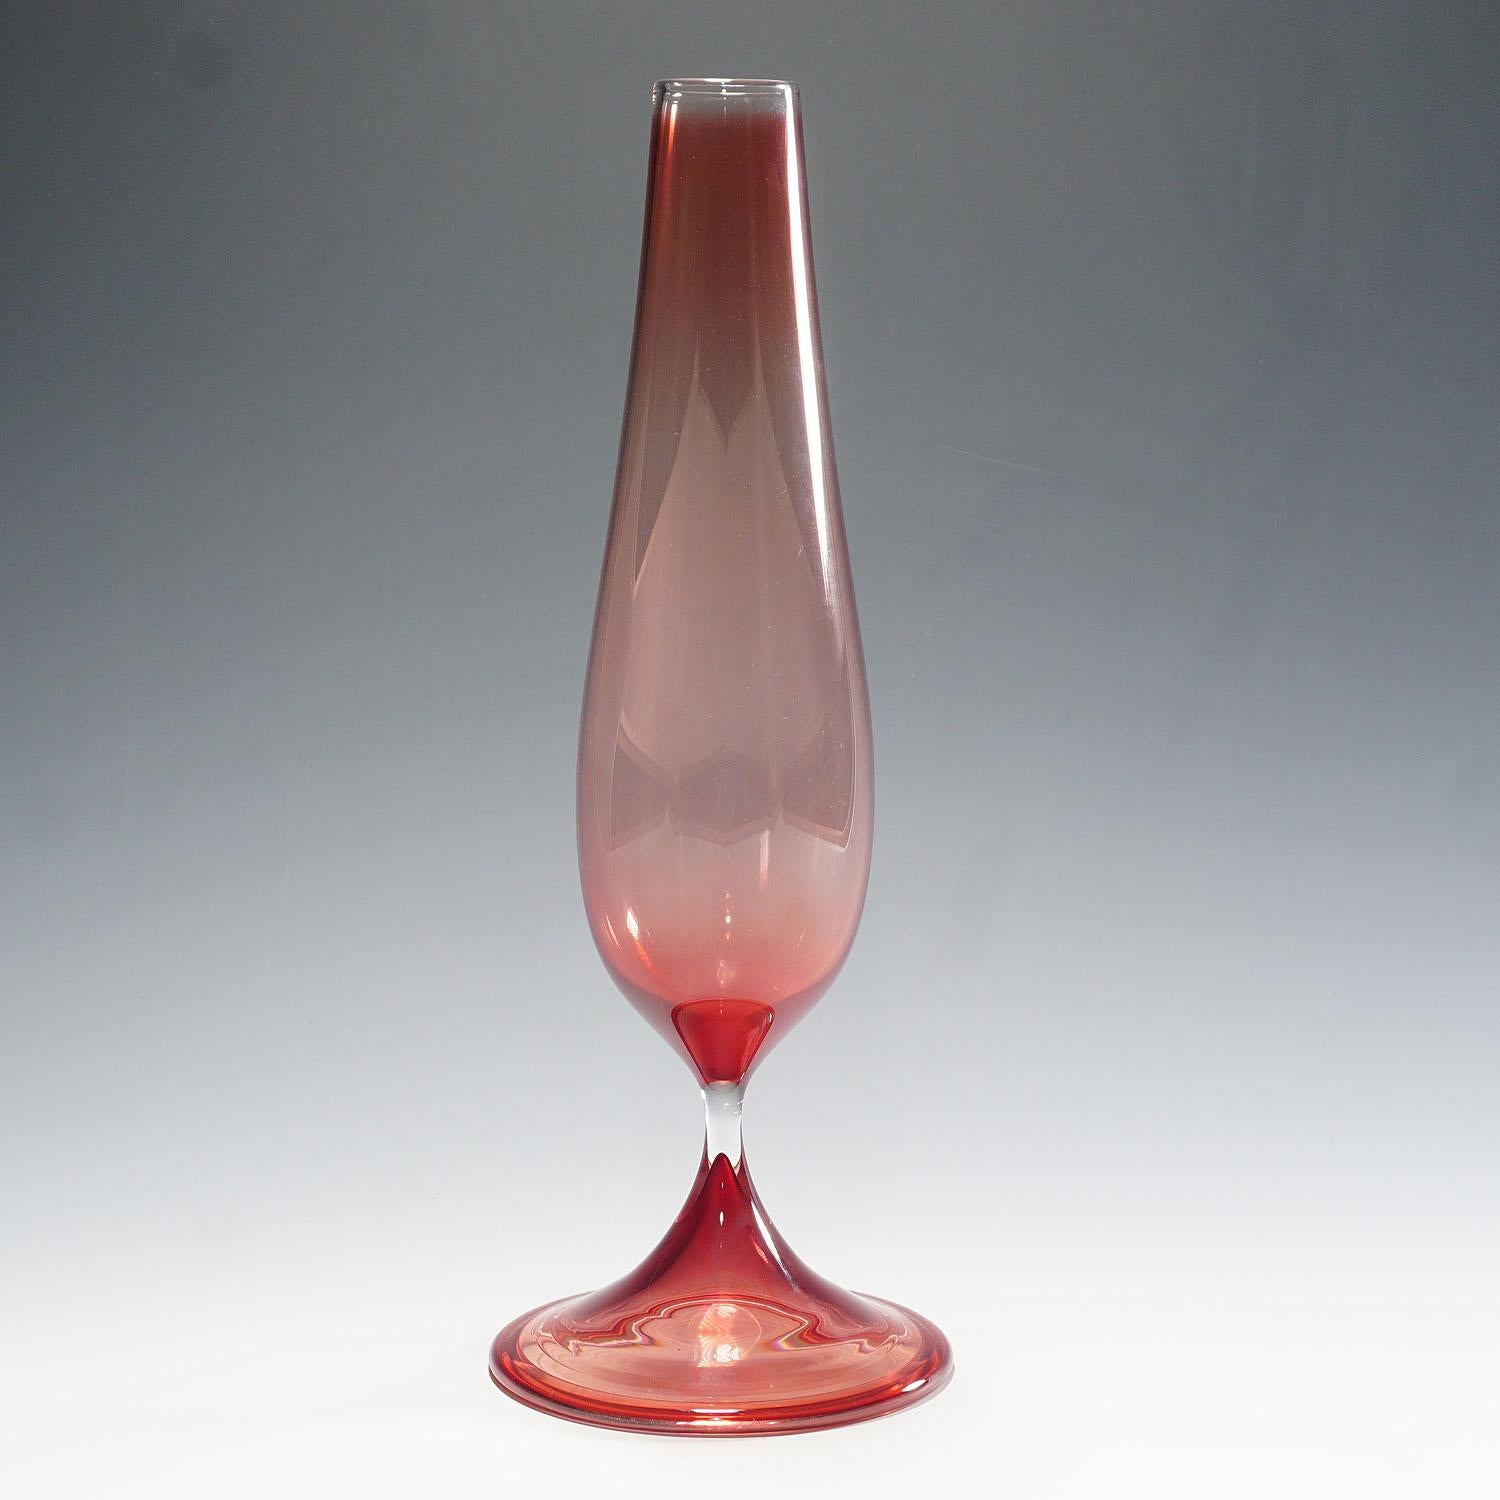 Stylish 'Tulip' vase with elongated, fluting body on a slender column and flaring base in light red and clear coloration. Designed by Nils Landberg and produced by Orrefors, Sweden in 1957. A superb example from this iconic series. Engraved